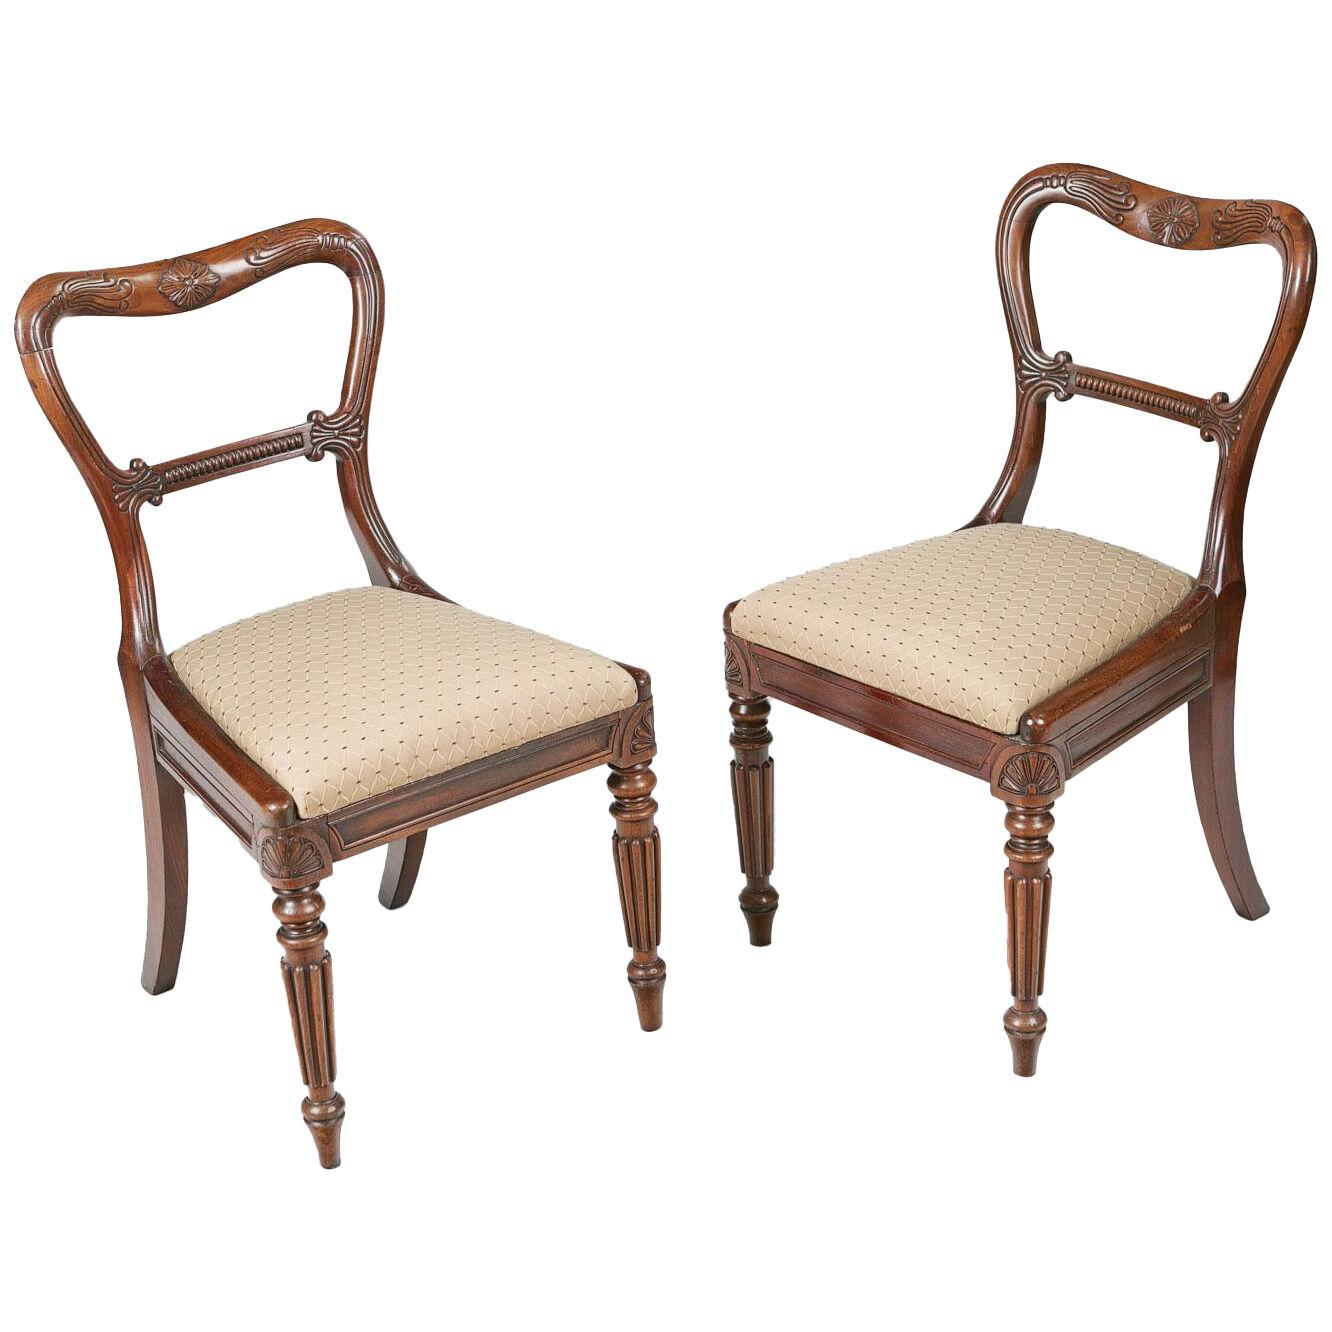 Early 19th Century George IV Pair of Chairs by Gillows of Lancaster and London